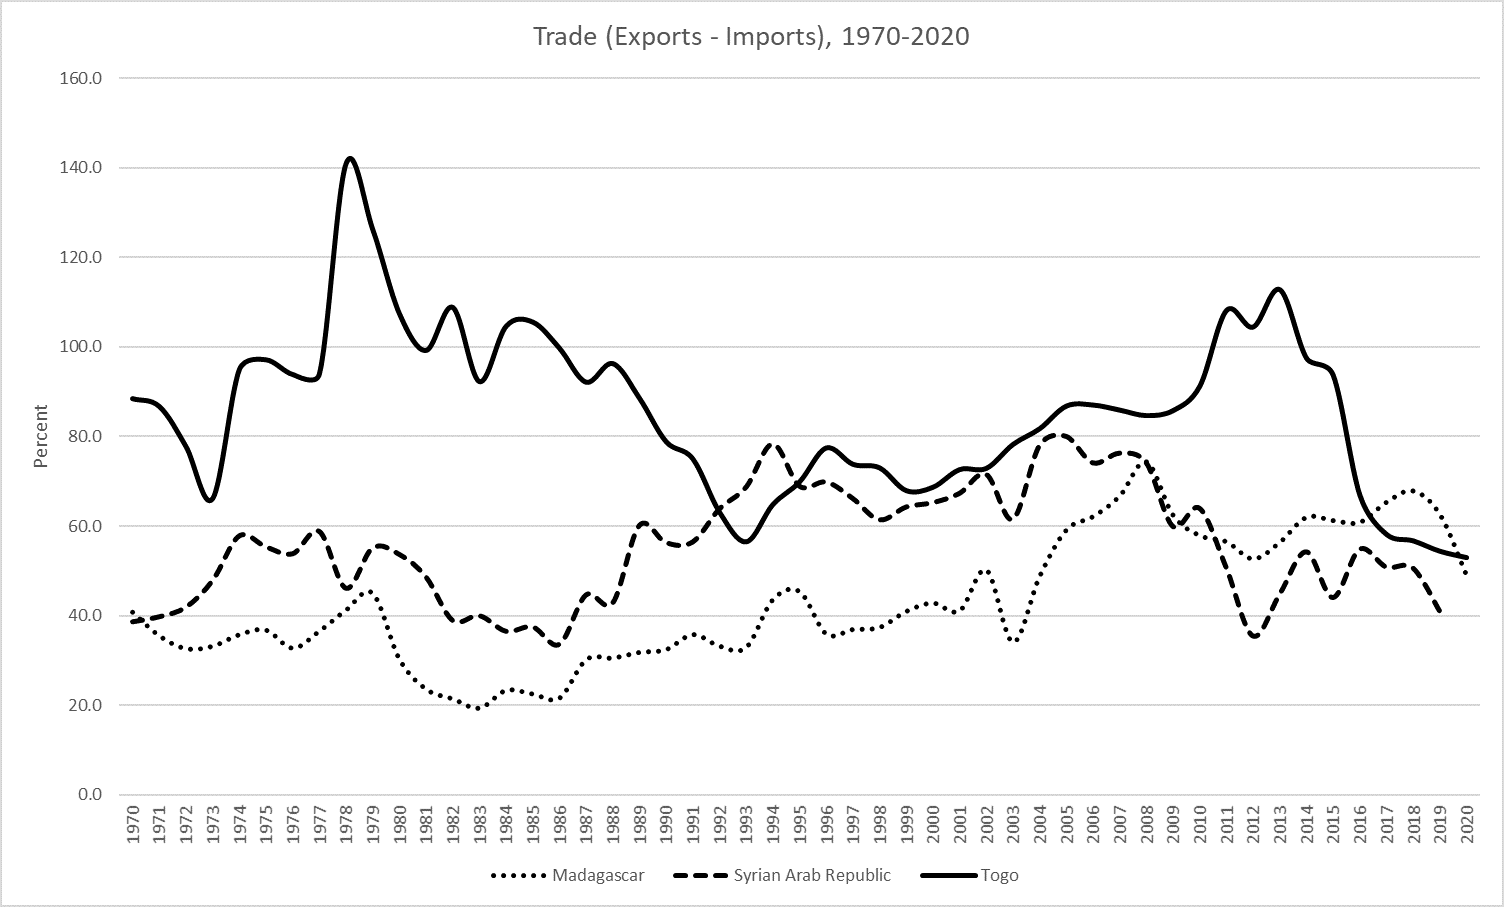 Net exports as a percentage of GDP for Madagascar, Syria, and Togo, 1970-2020. Trends are generally stable, with considerable long-run variation for Togo.